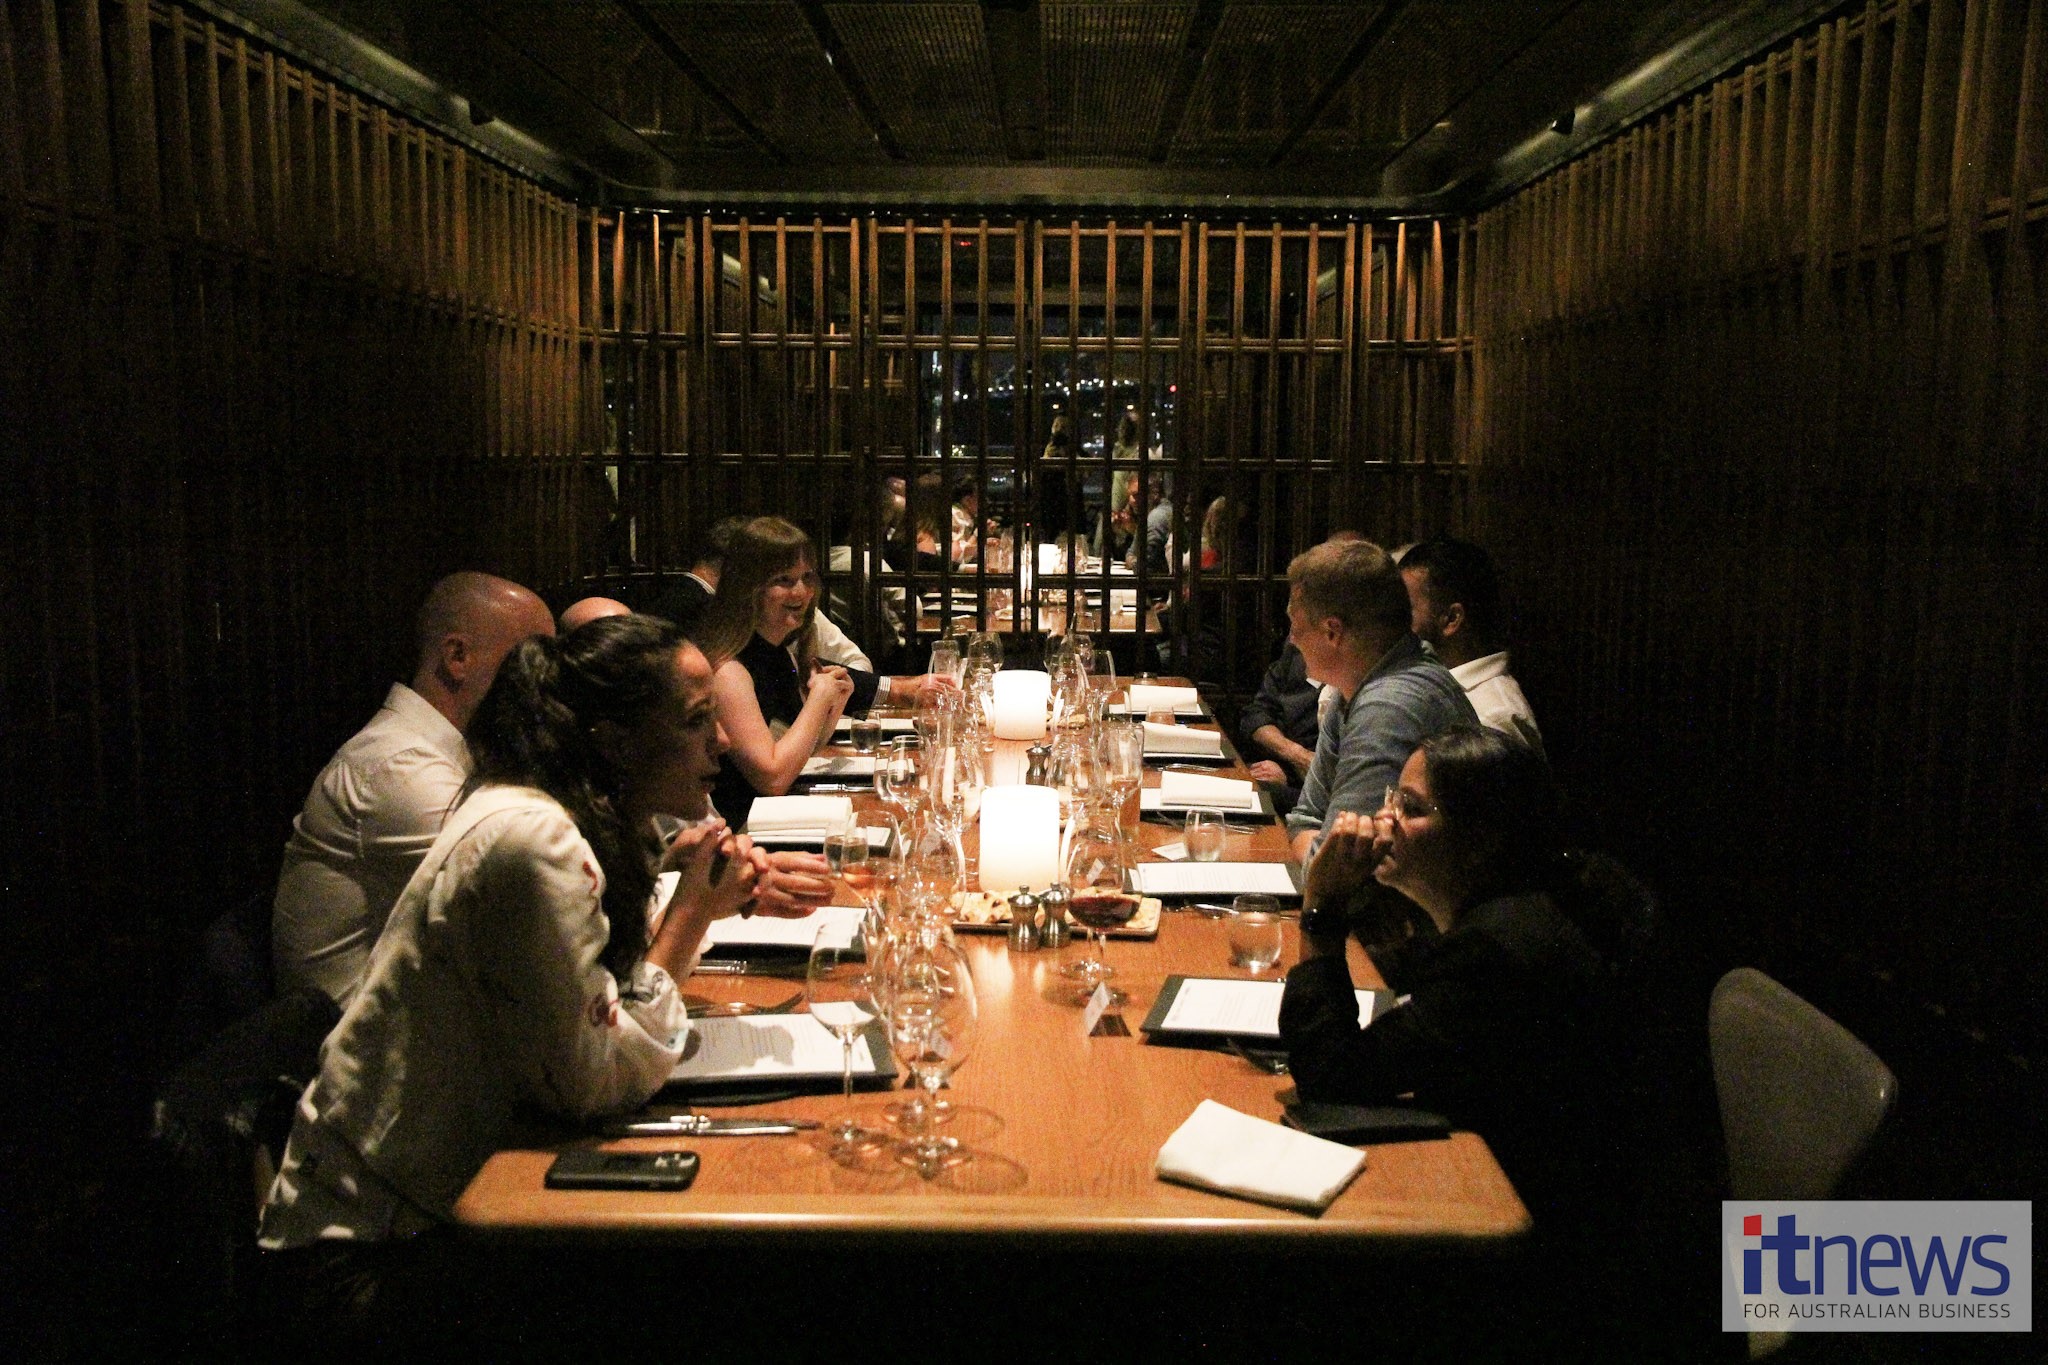 In pictures: Work Perfect and monday.com roundtable dinner